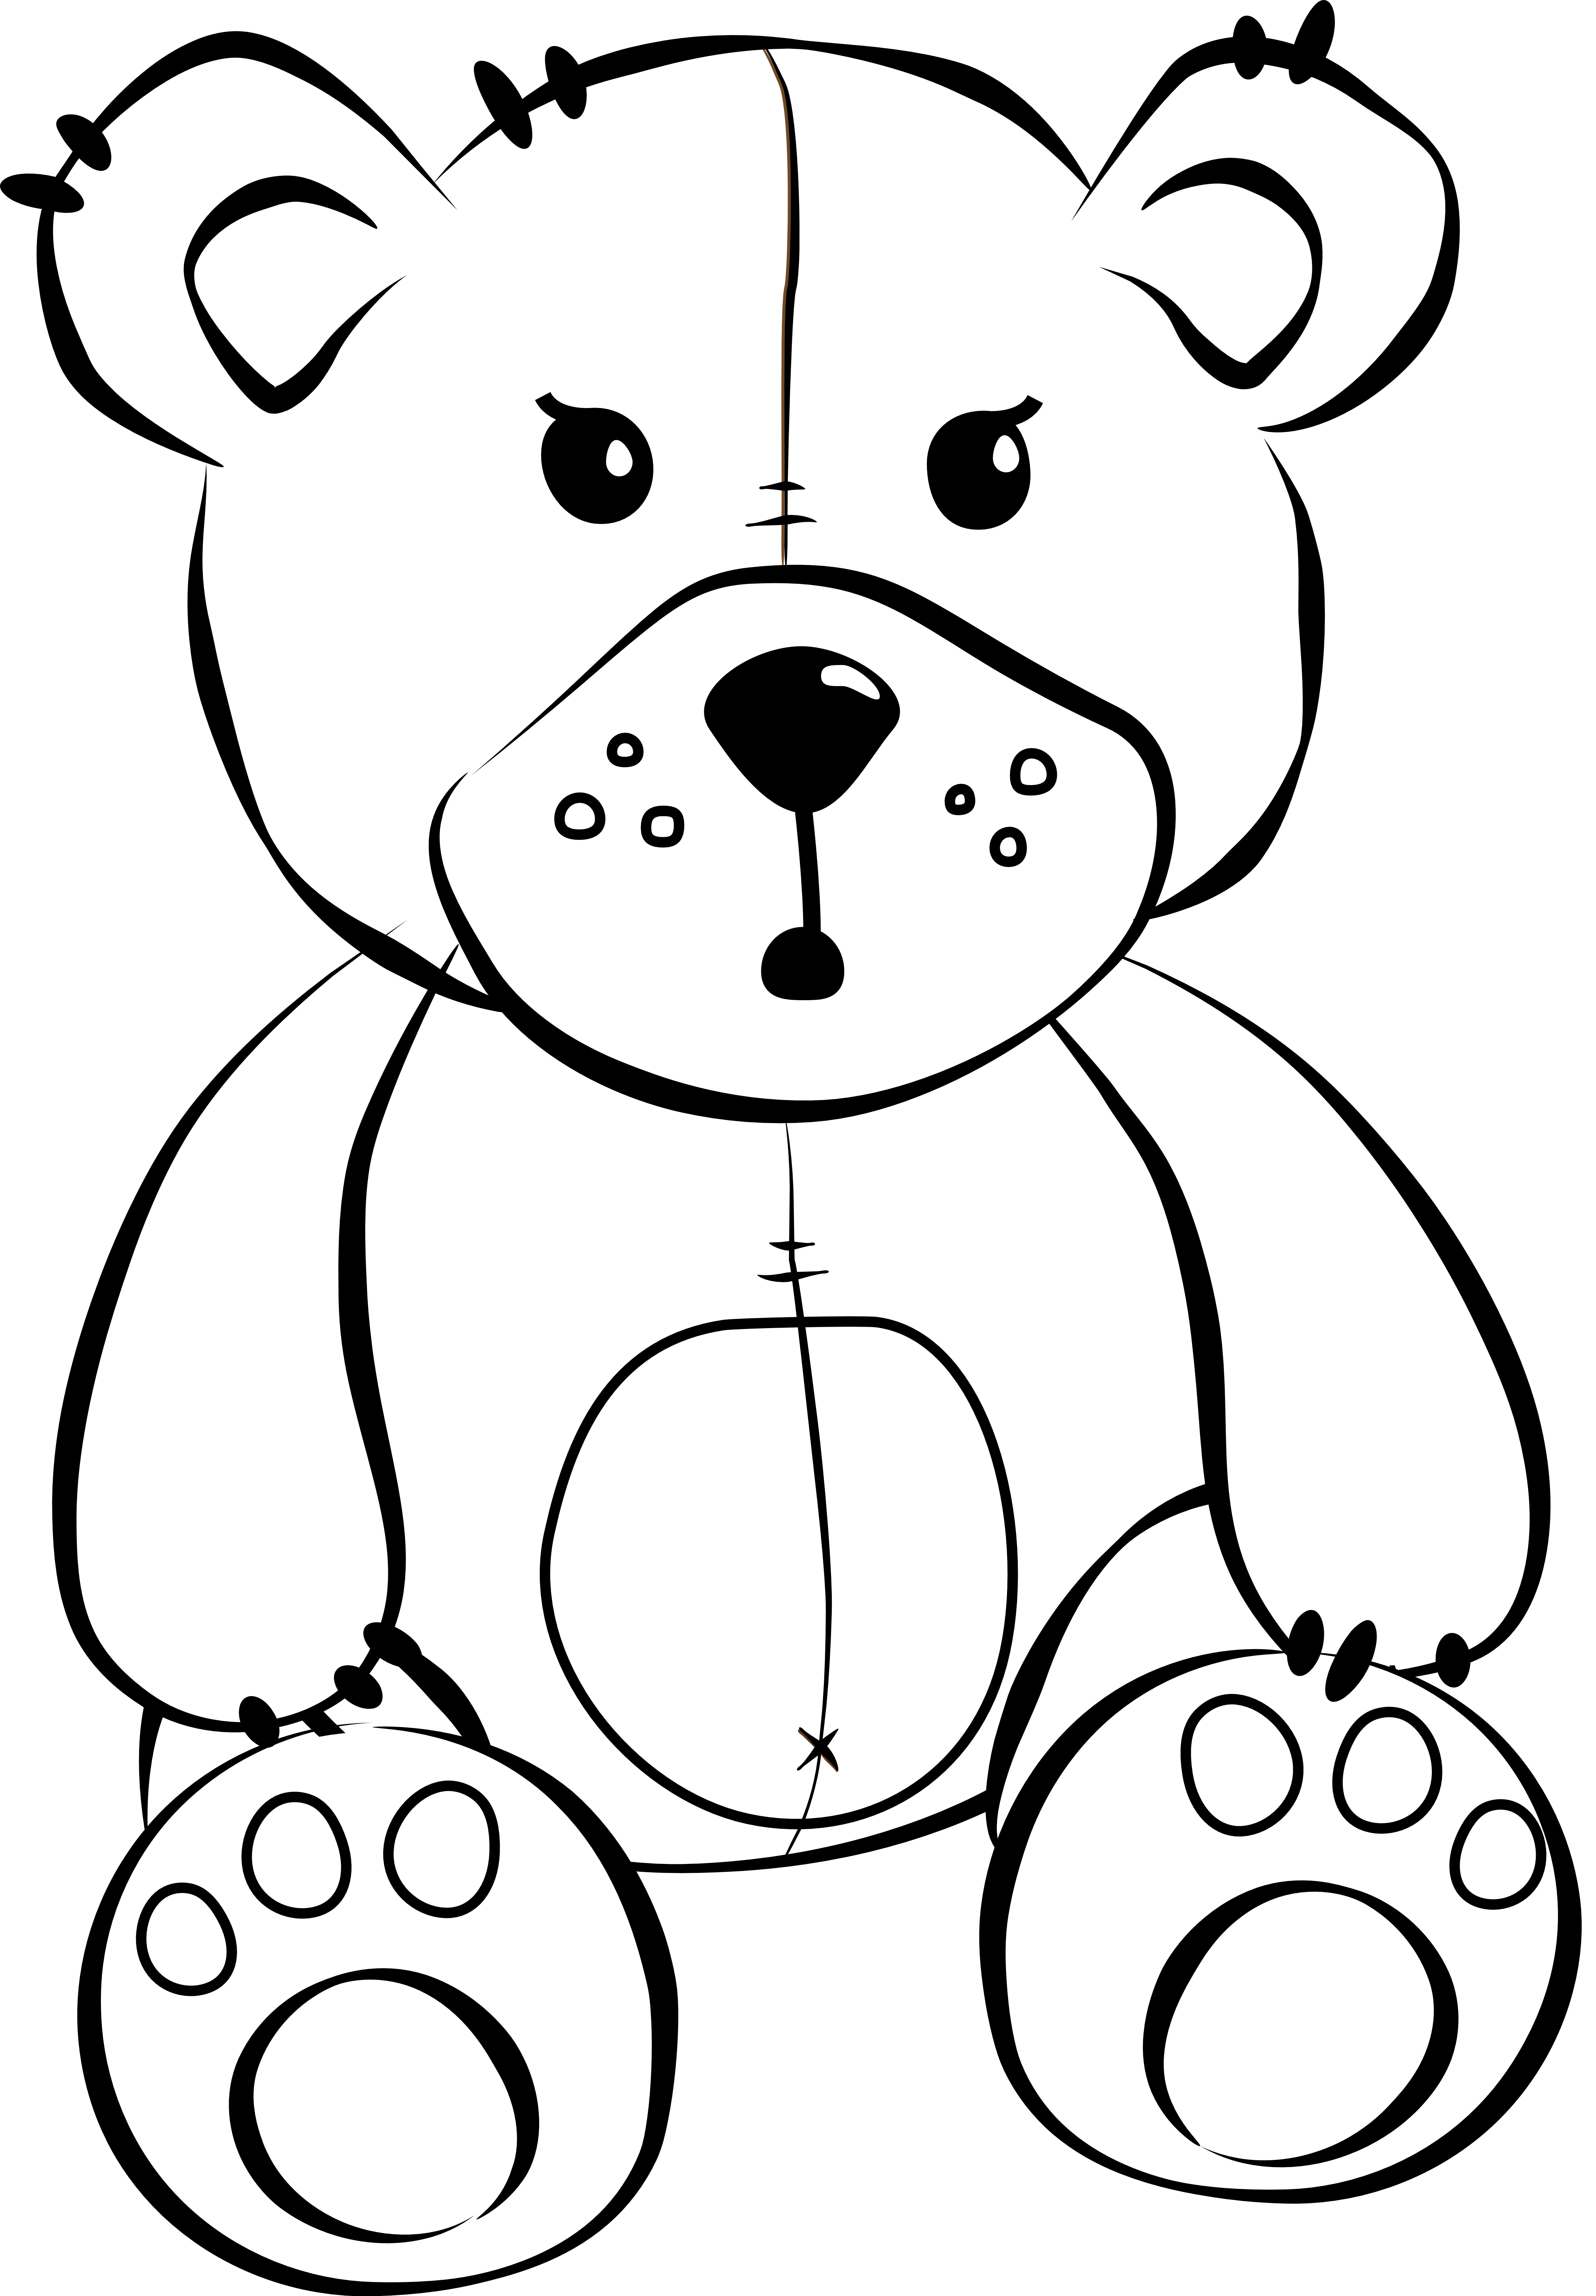 Teddy Bear Black And White White Bear Cartoon Free Download Clip Art On - Teddy Bear Black And White, Transparent background PNG HD thumbnail